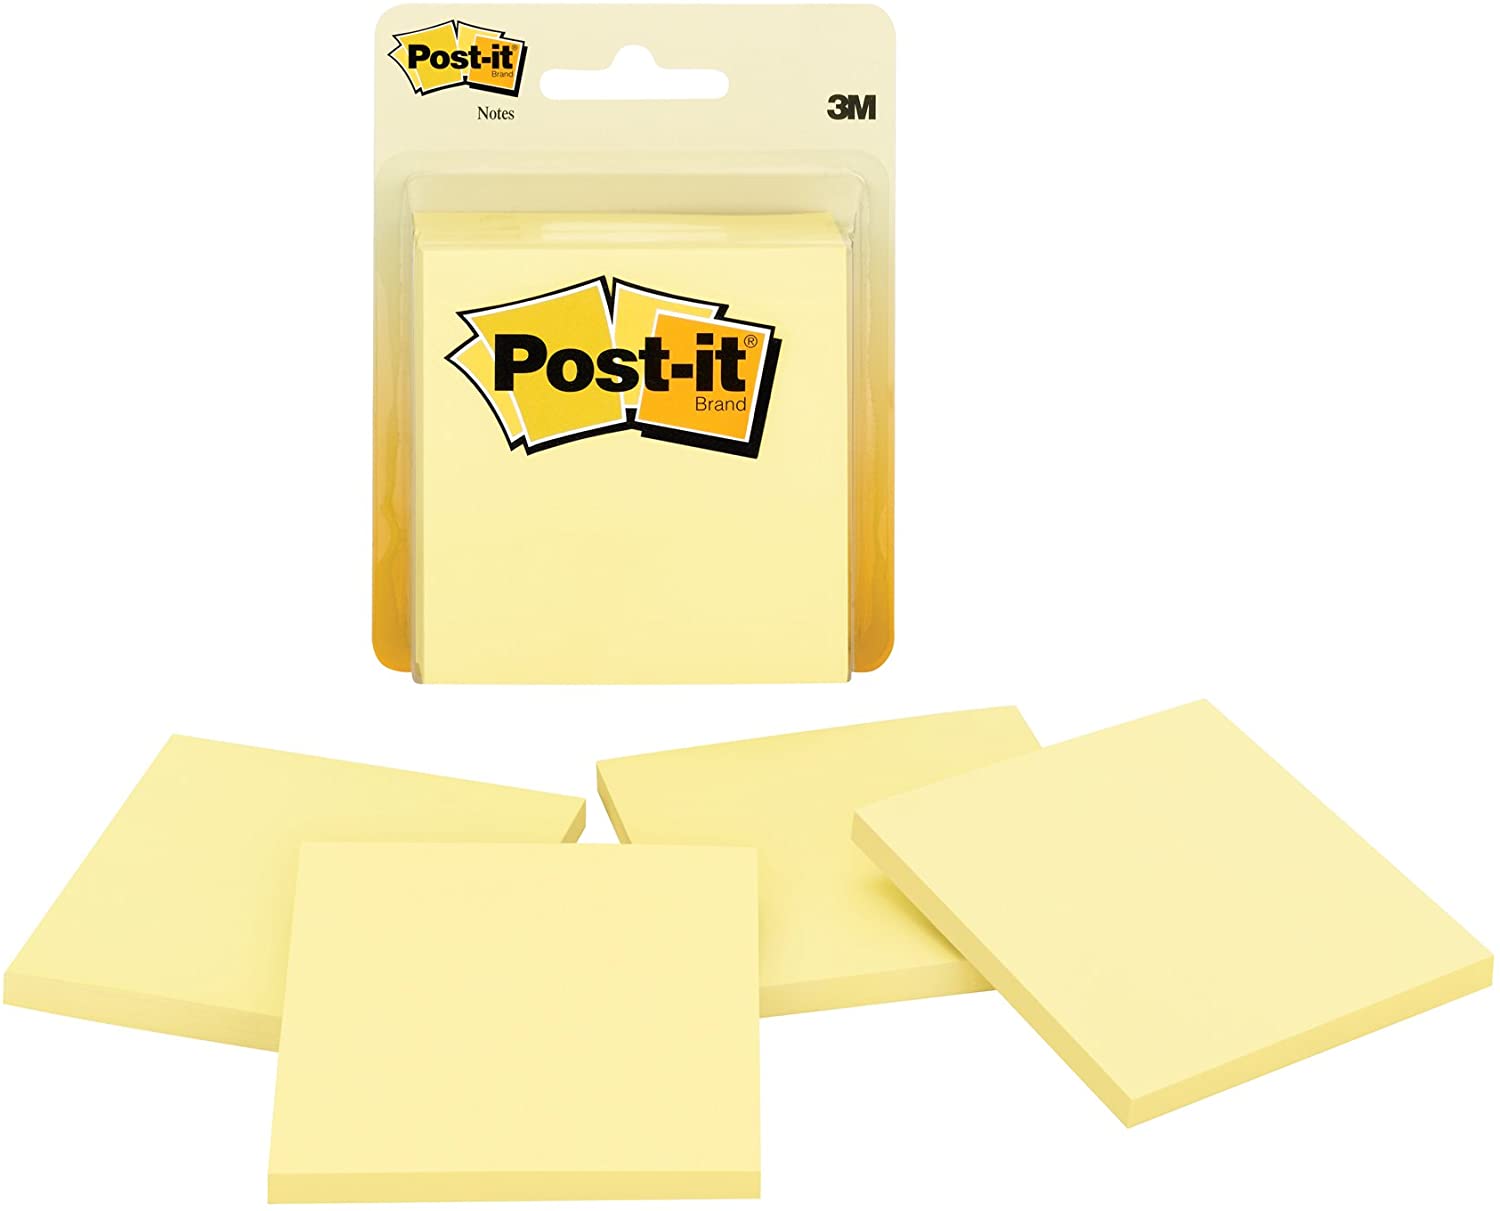 Detail Sticky Note Images Nomer 22